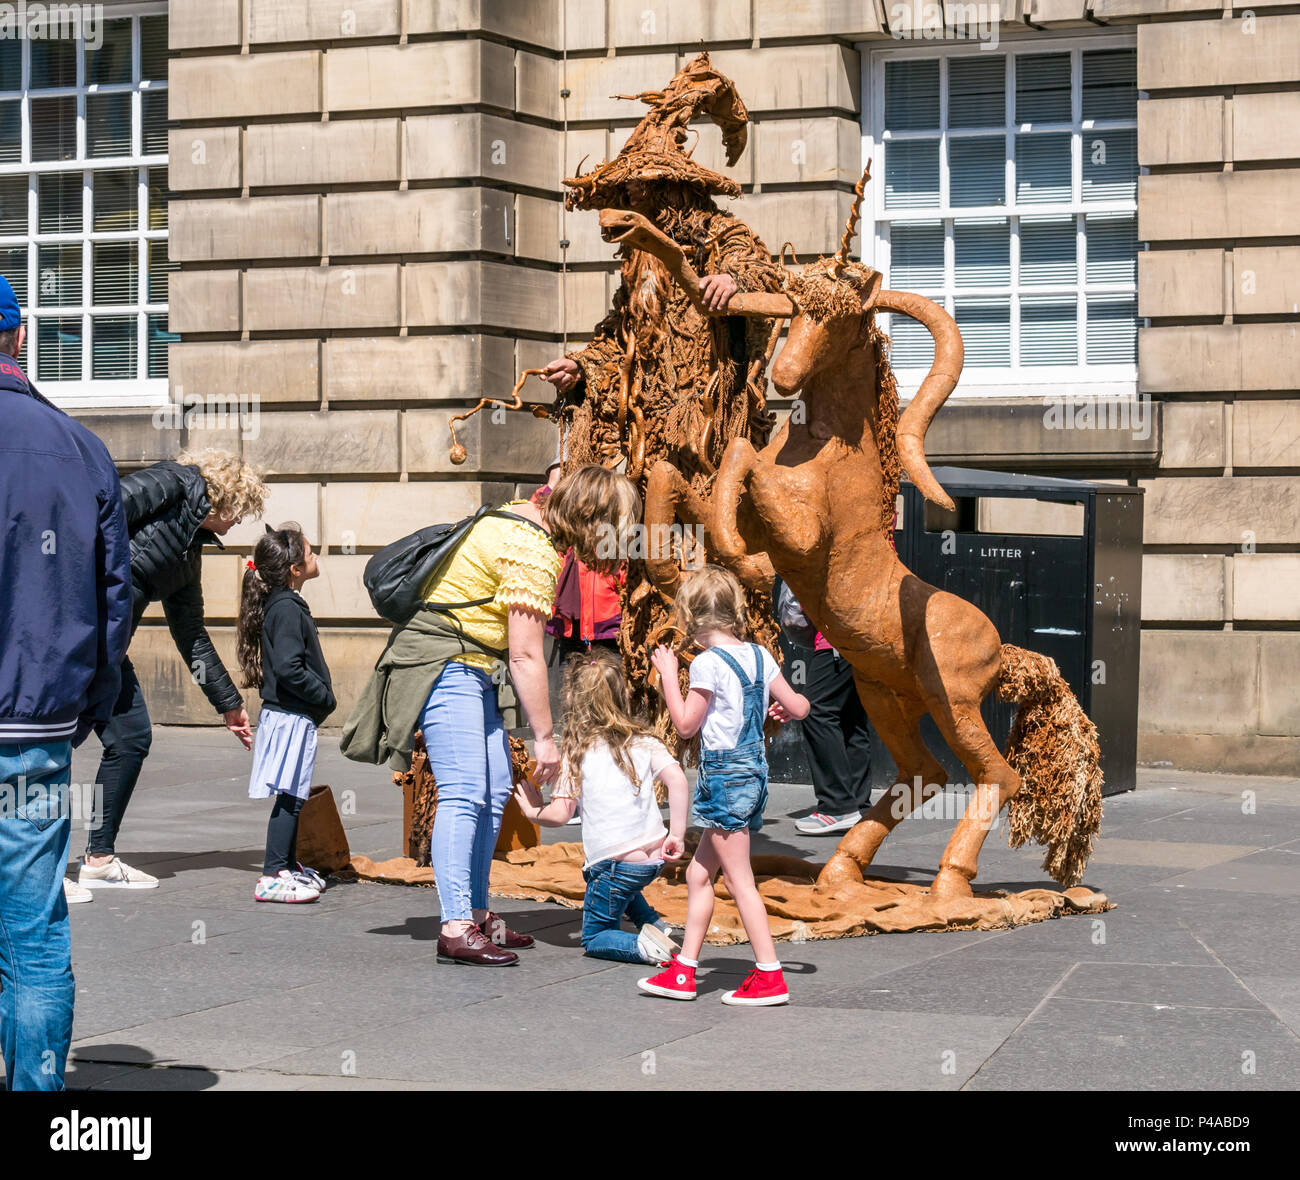 Edinburgh, Scotland, United Kingdom, 21st June 2018. A street performer in a levitation act dressed as Gandalf the Wizard with a unicorn to entertain passers by on the Royal Mile during the Summer season. A woman and children are entertained by the street act as people pass by Stock Photo